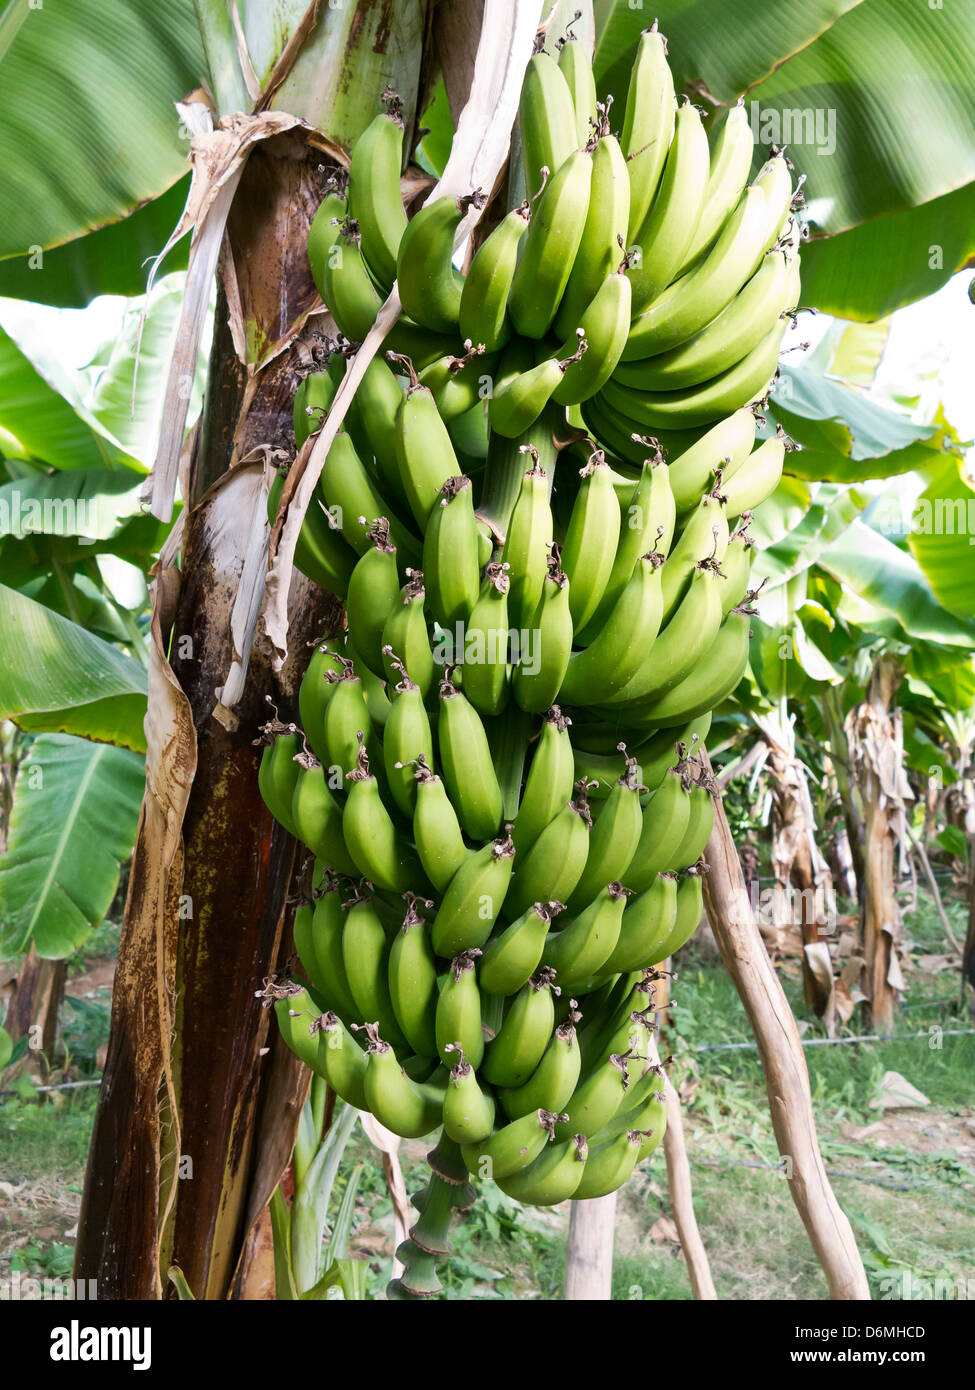 Banana plants growing in greenhouse in the area of the Anti Atlas mountains near Taroudannt. Stock Photo